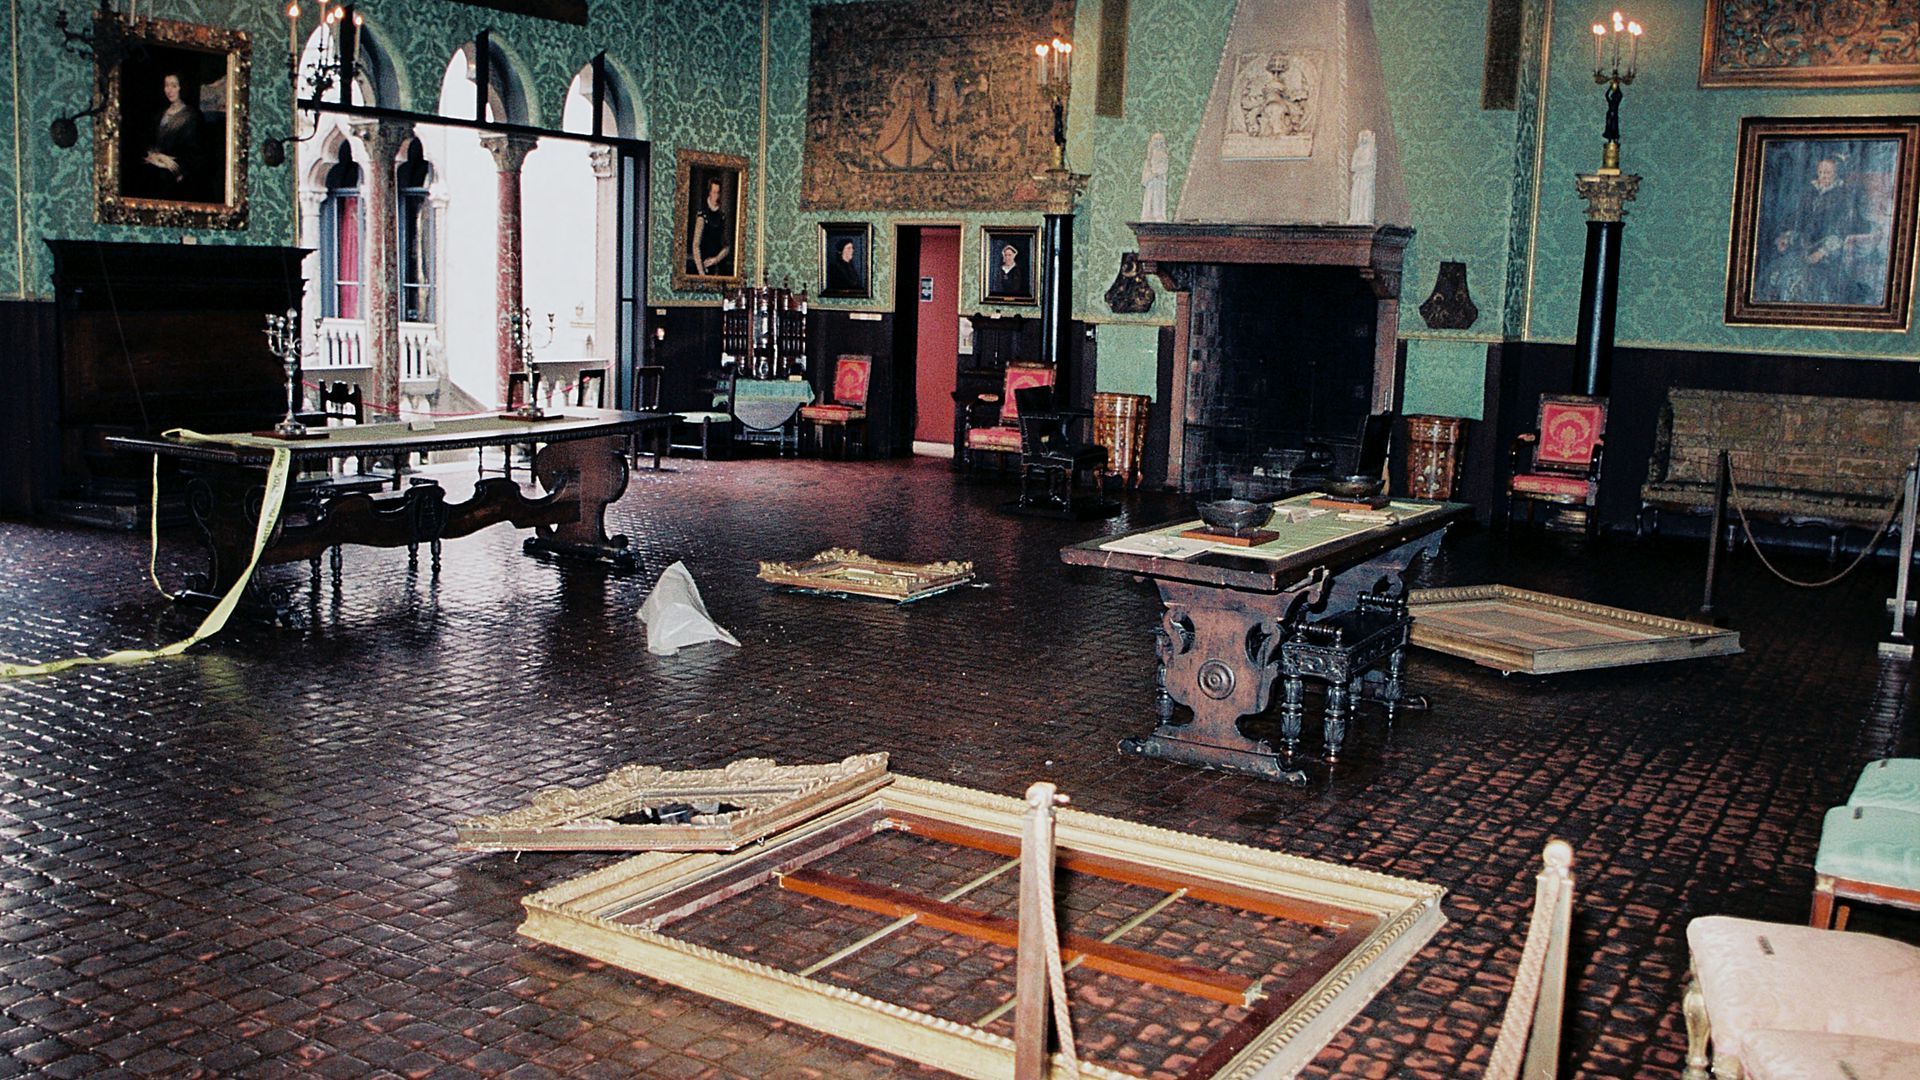 FBI photo of the crime scene after the Isabella Stewart Gardner Museum robbery.